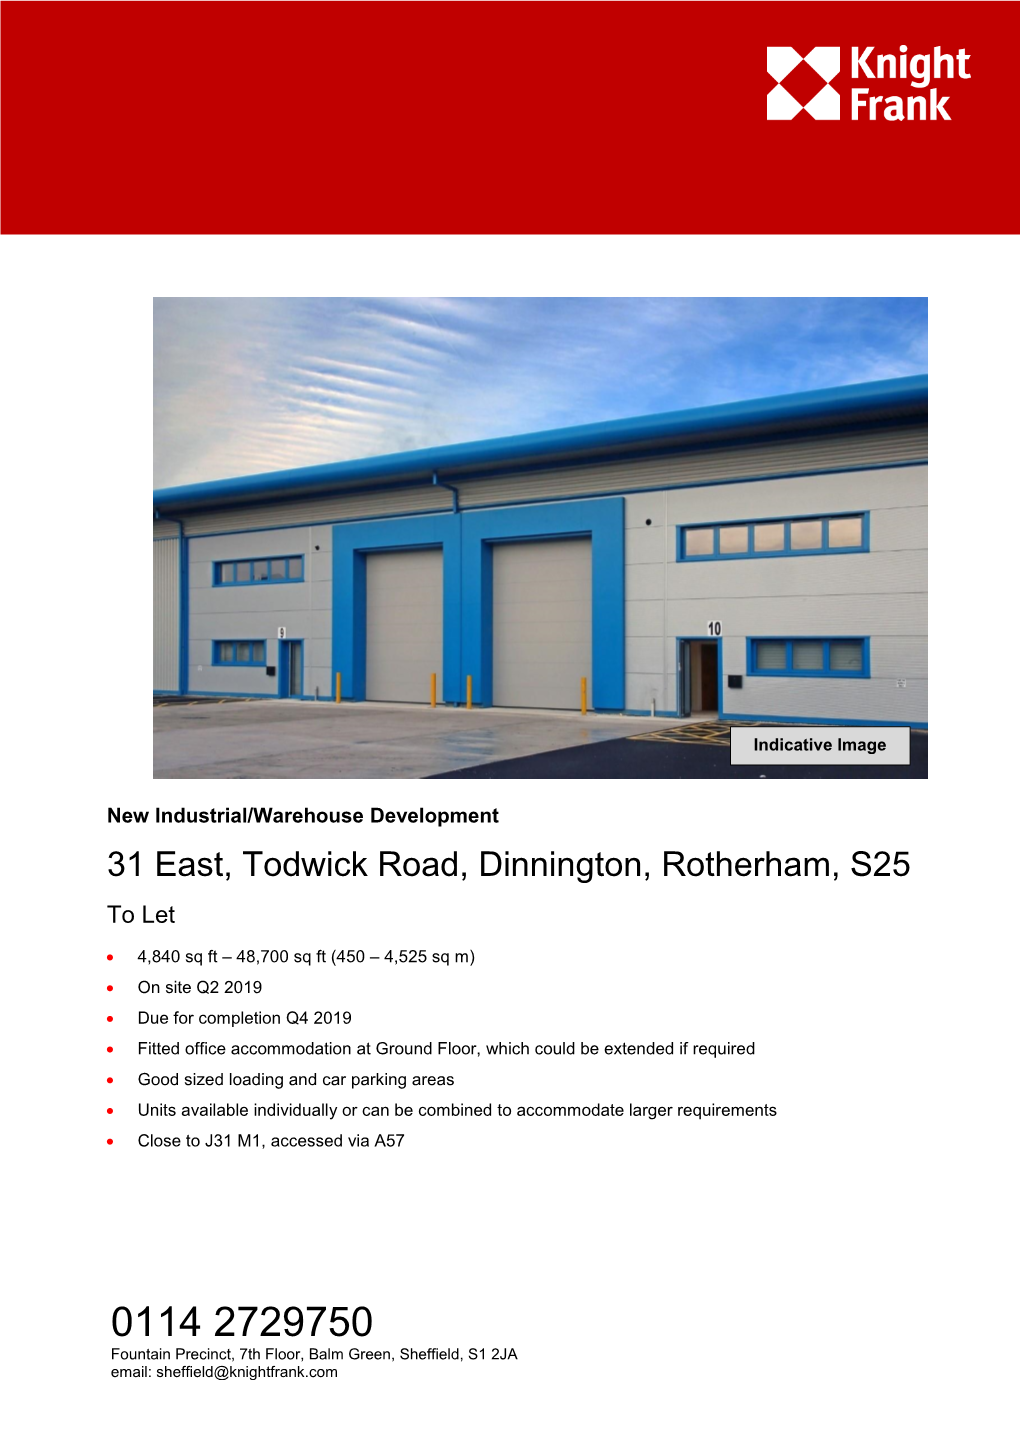 31 East, Todwick Road, Dinnington, Rotherham, S25 to Let